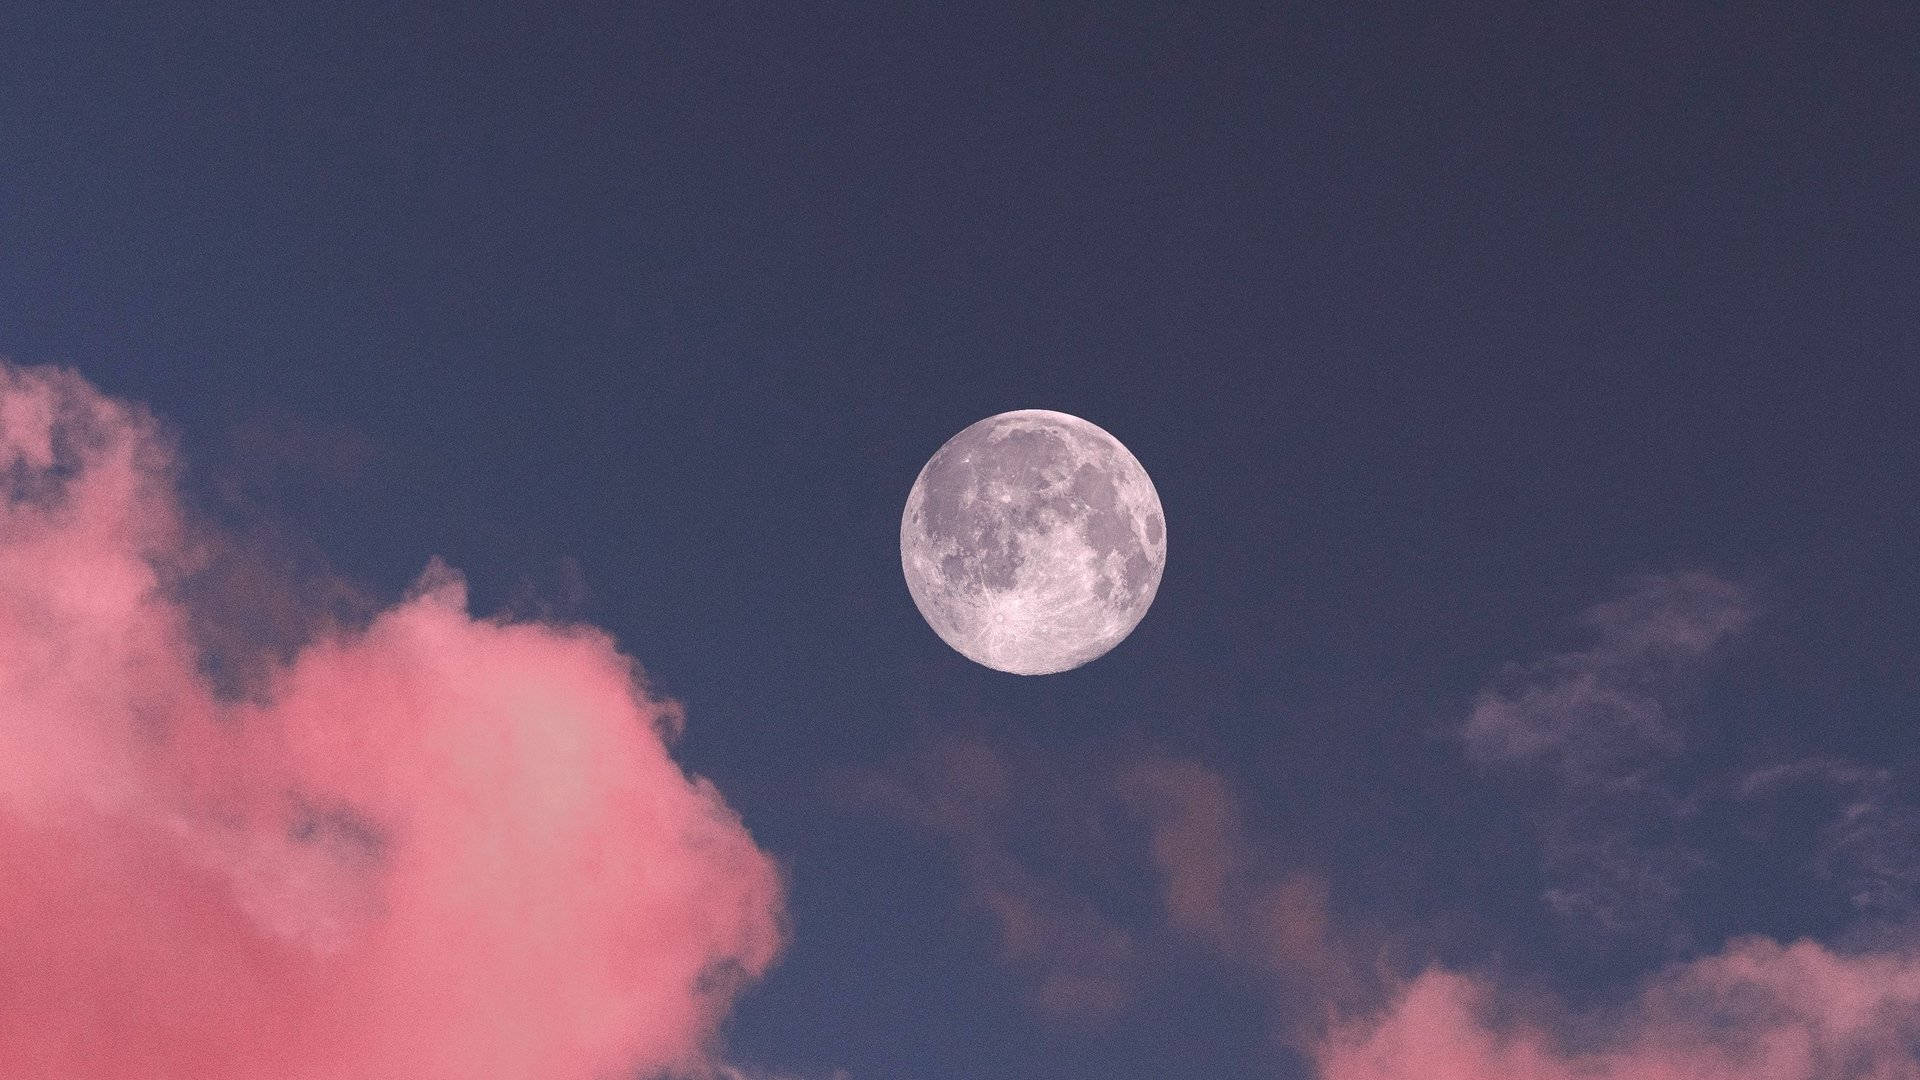 A full moon with pink clouds in the sky. - Moon